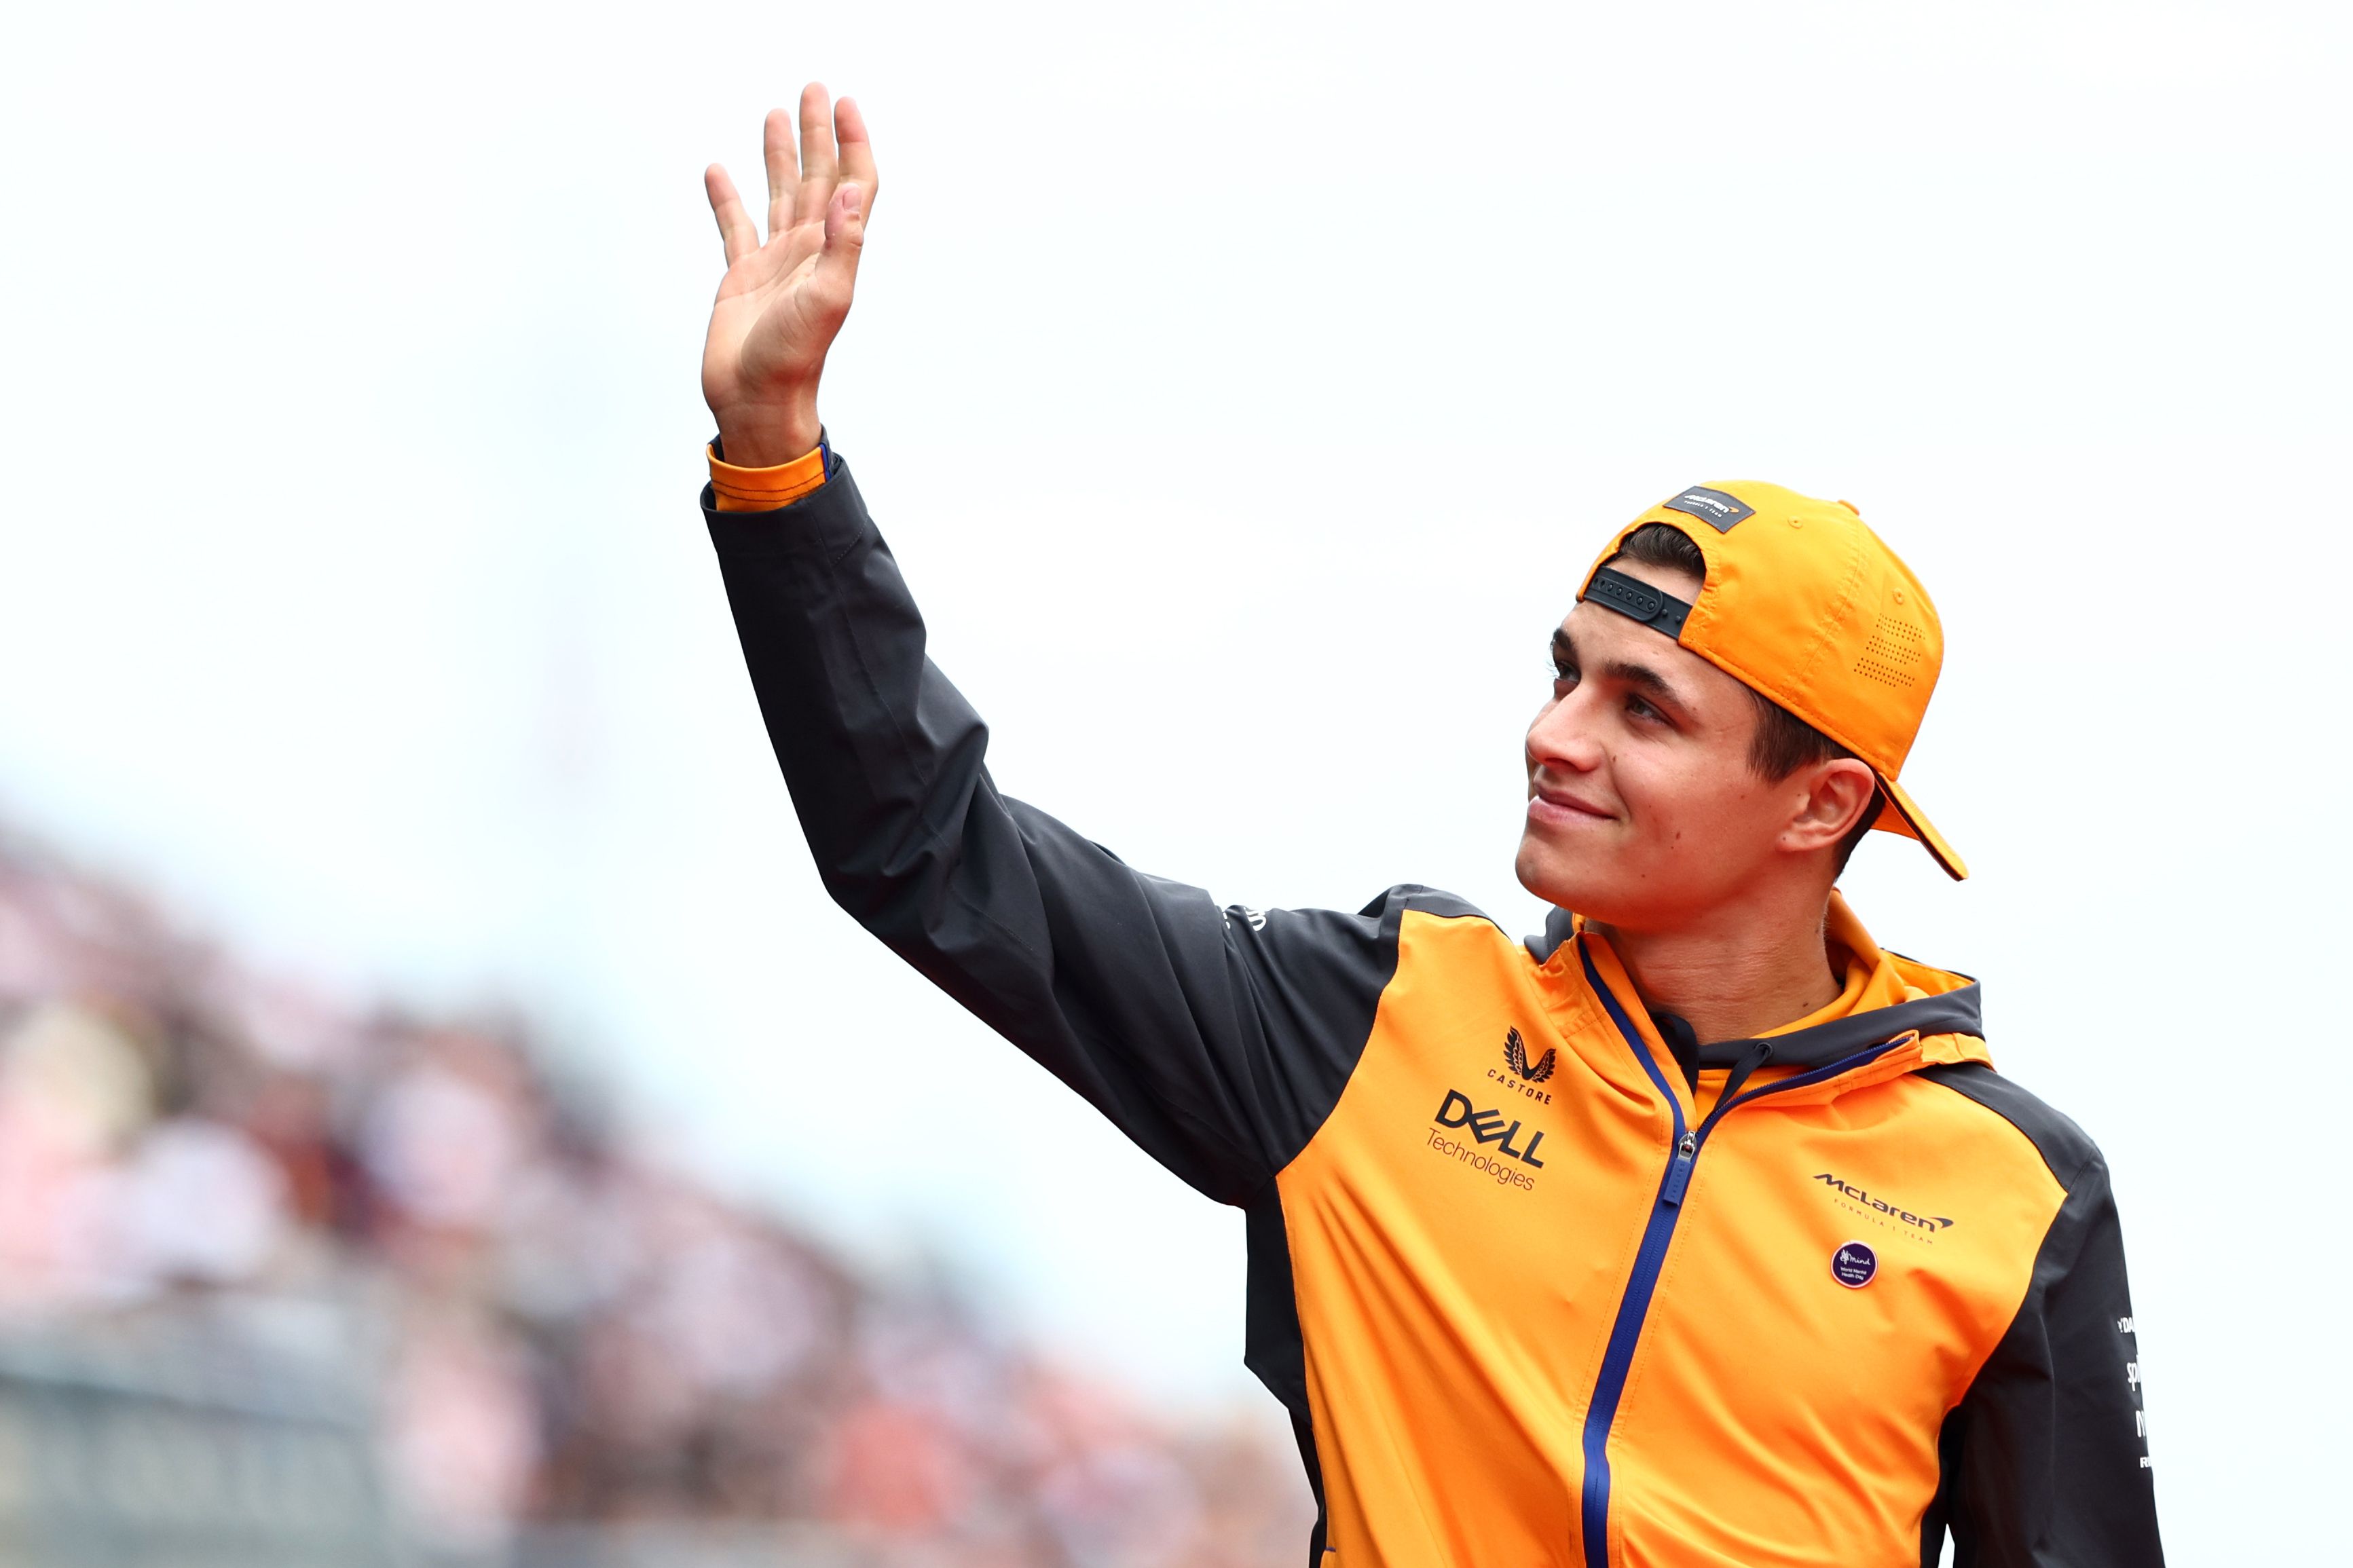 Lando Norris waves to the crowd at the Japanese Grand Prix